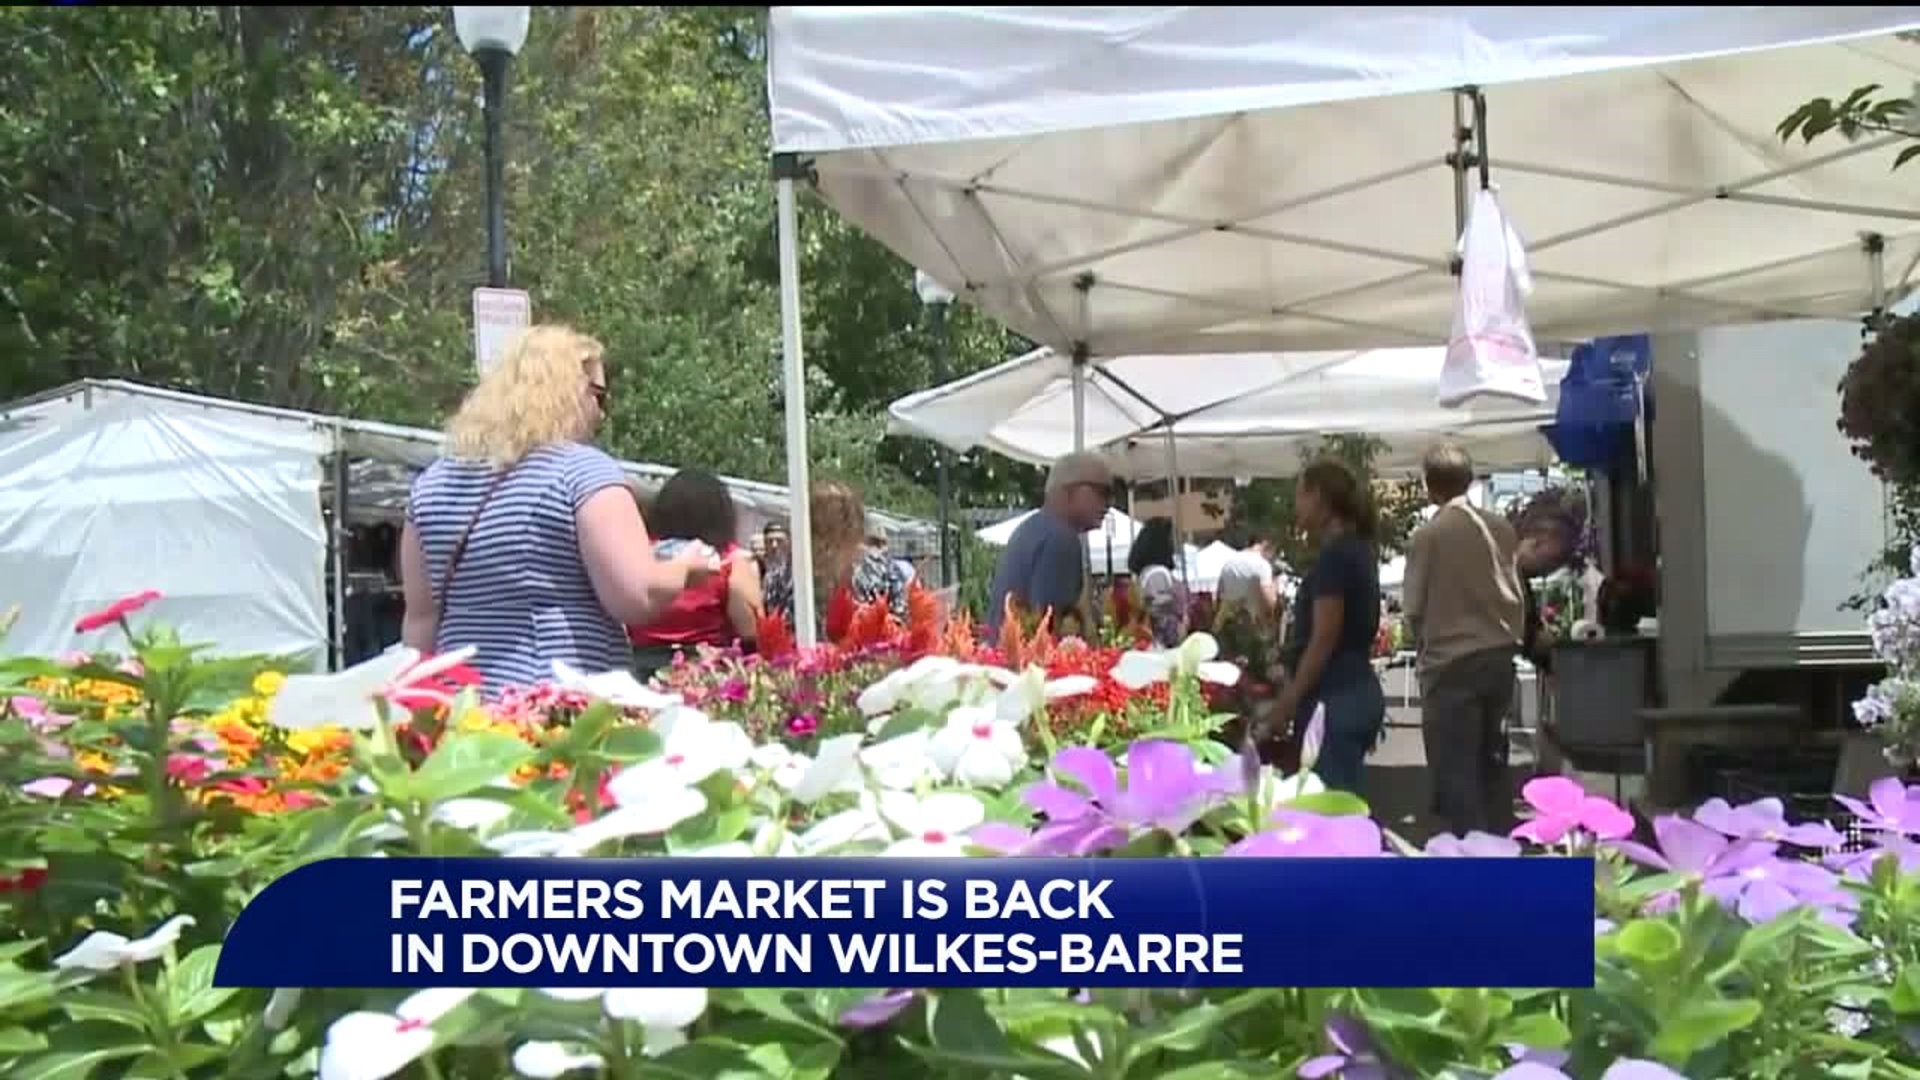 Wilkes-Barre Farmers Market Blossoms with Business